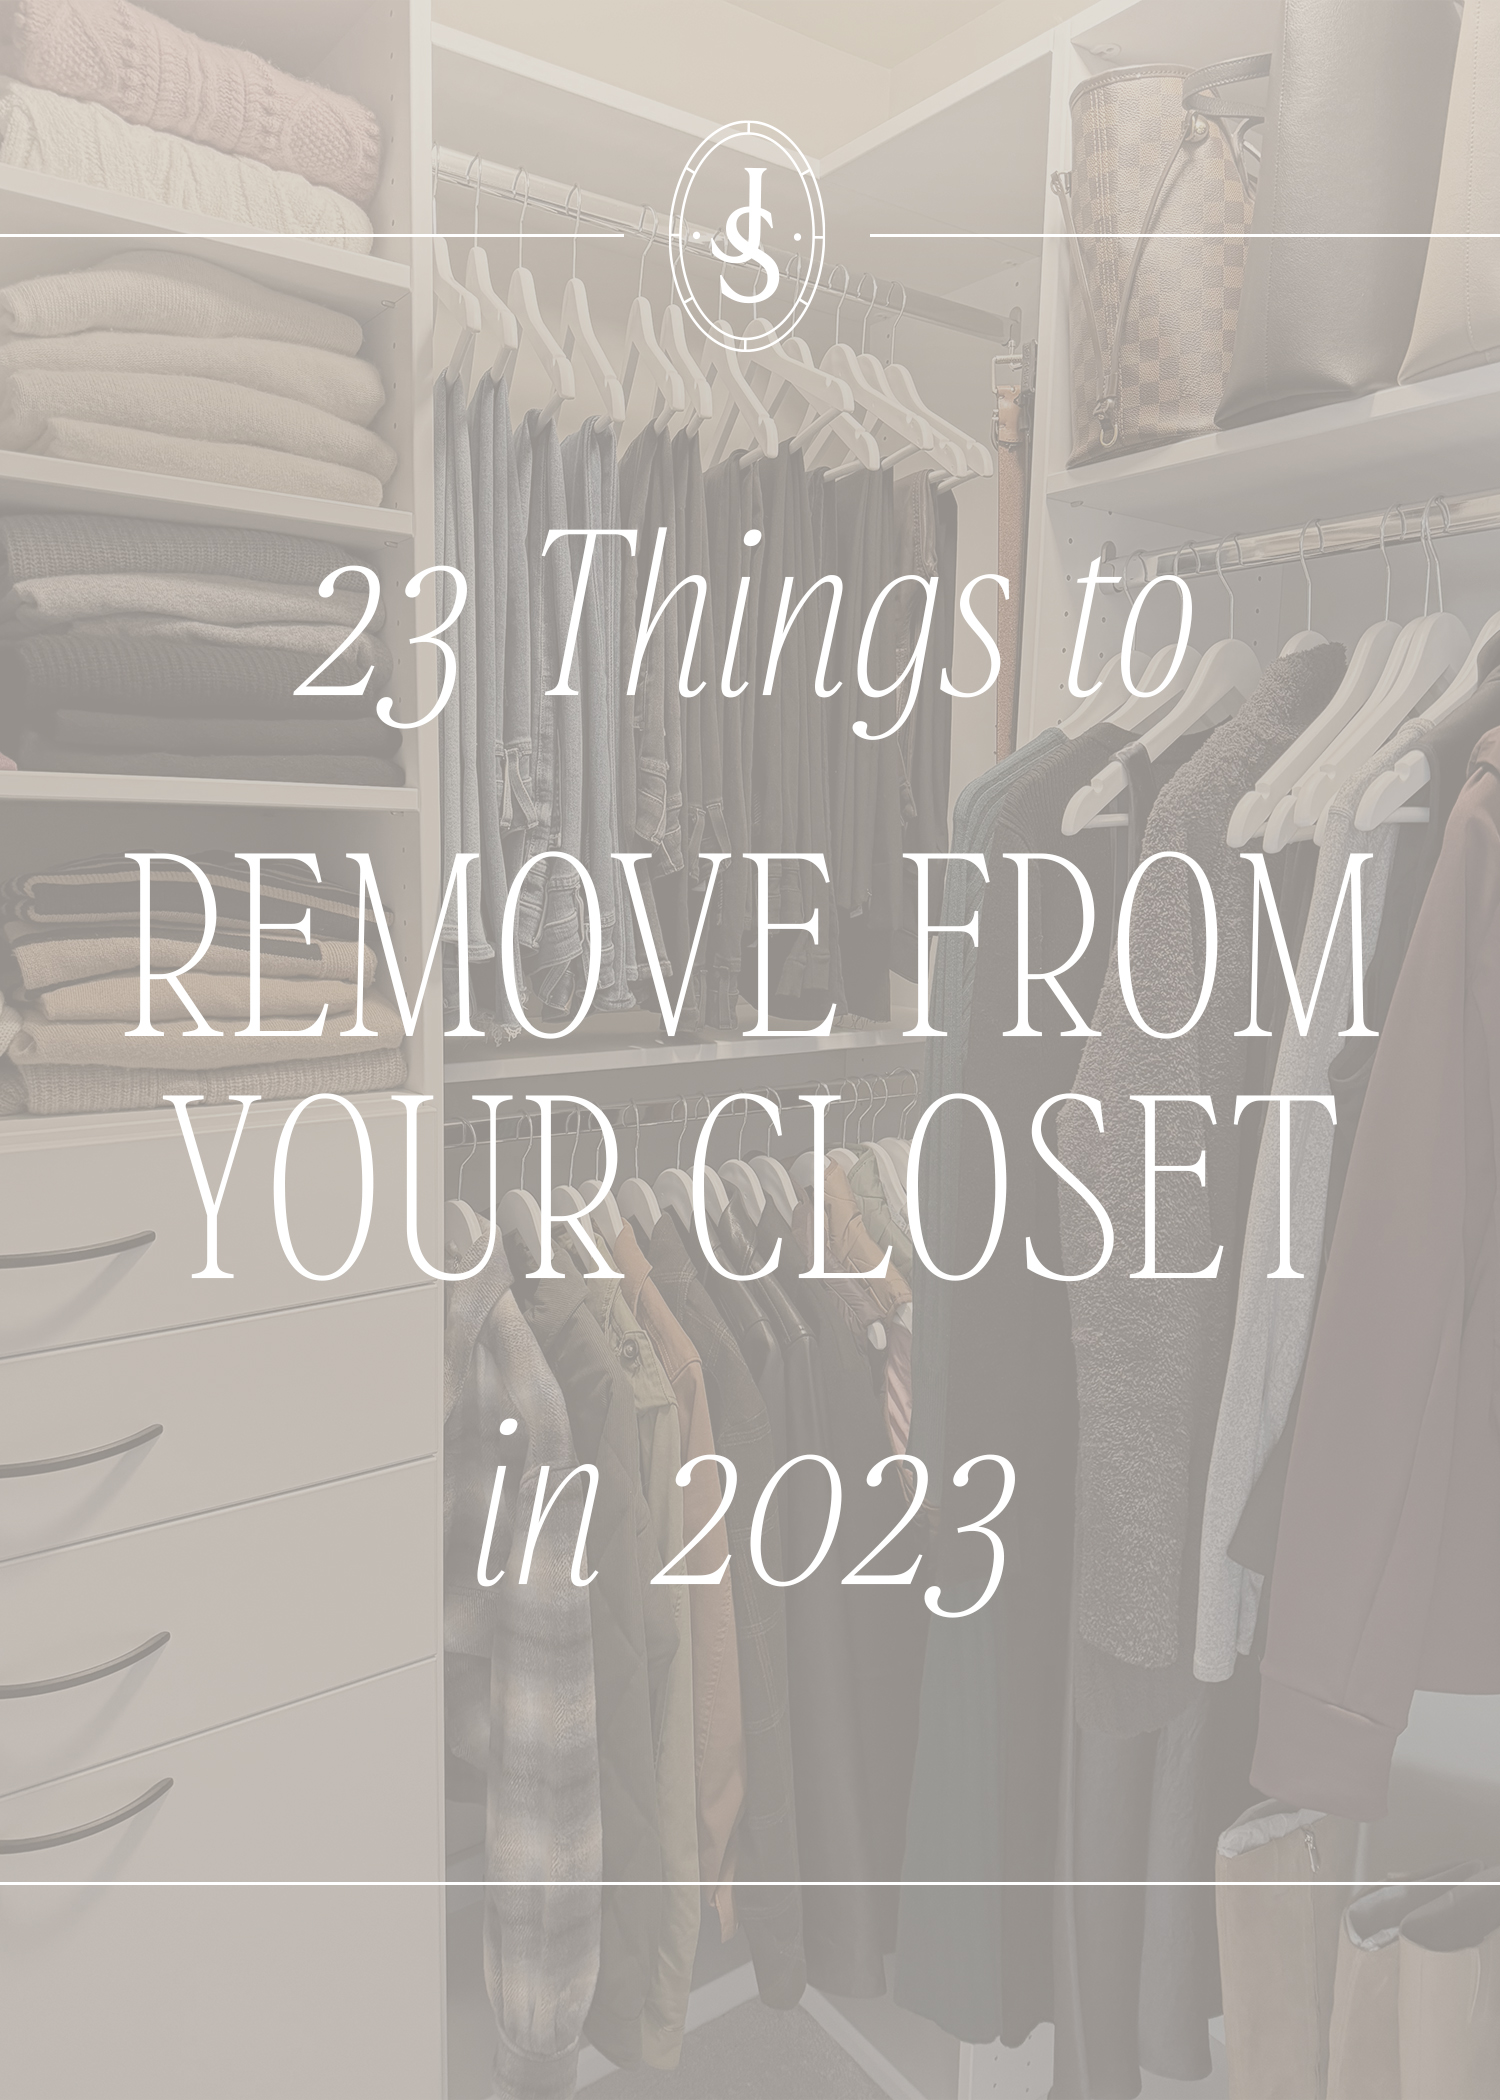 How To Clean Out Your Closet & Make It Fun - Inspired By This